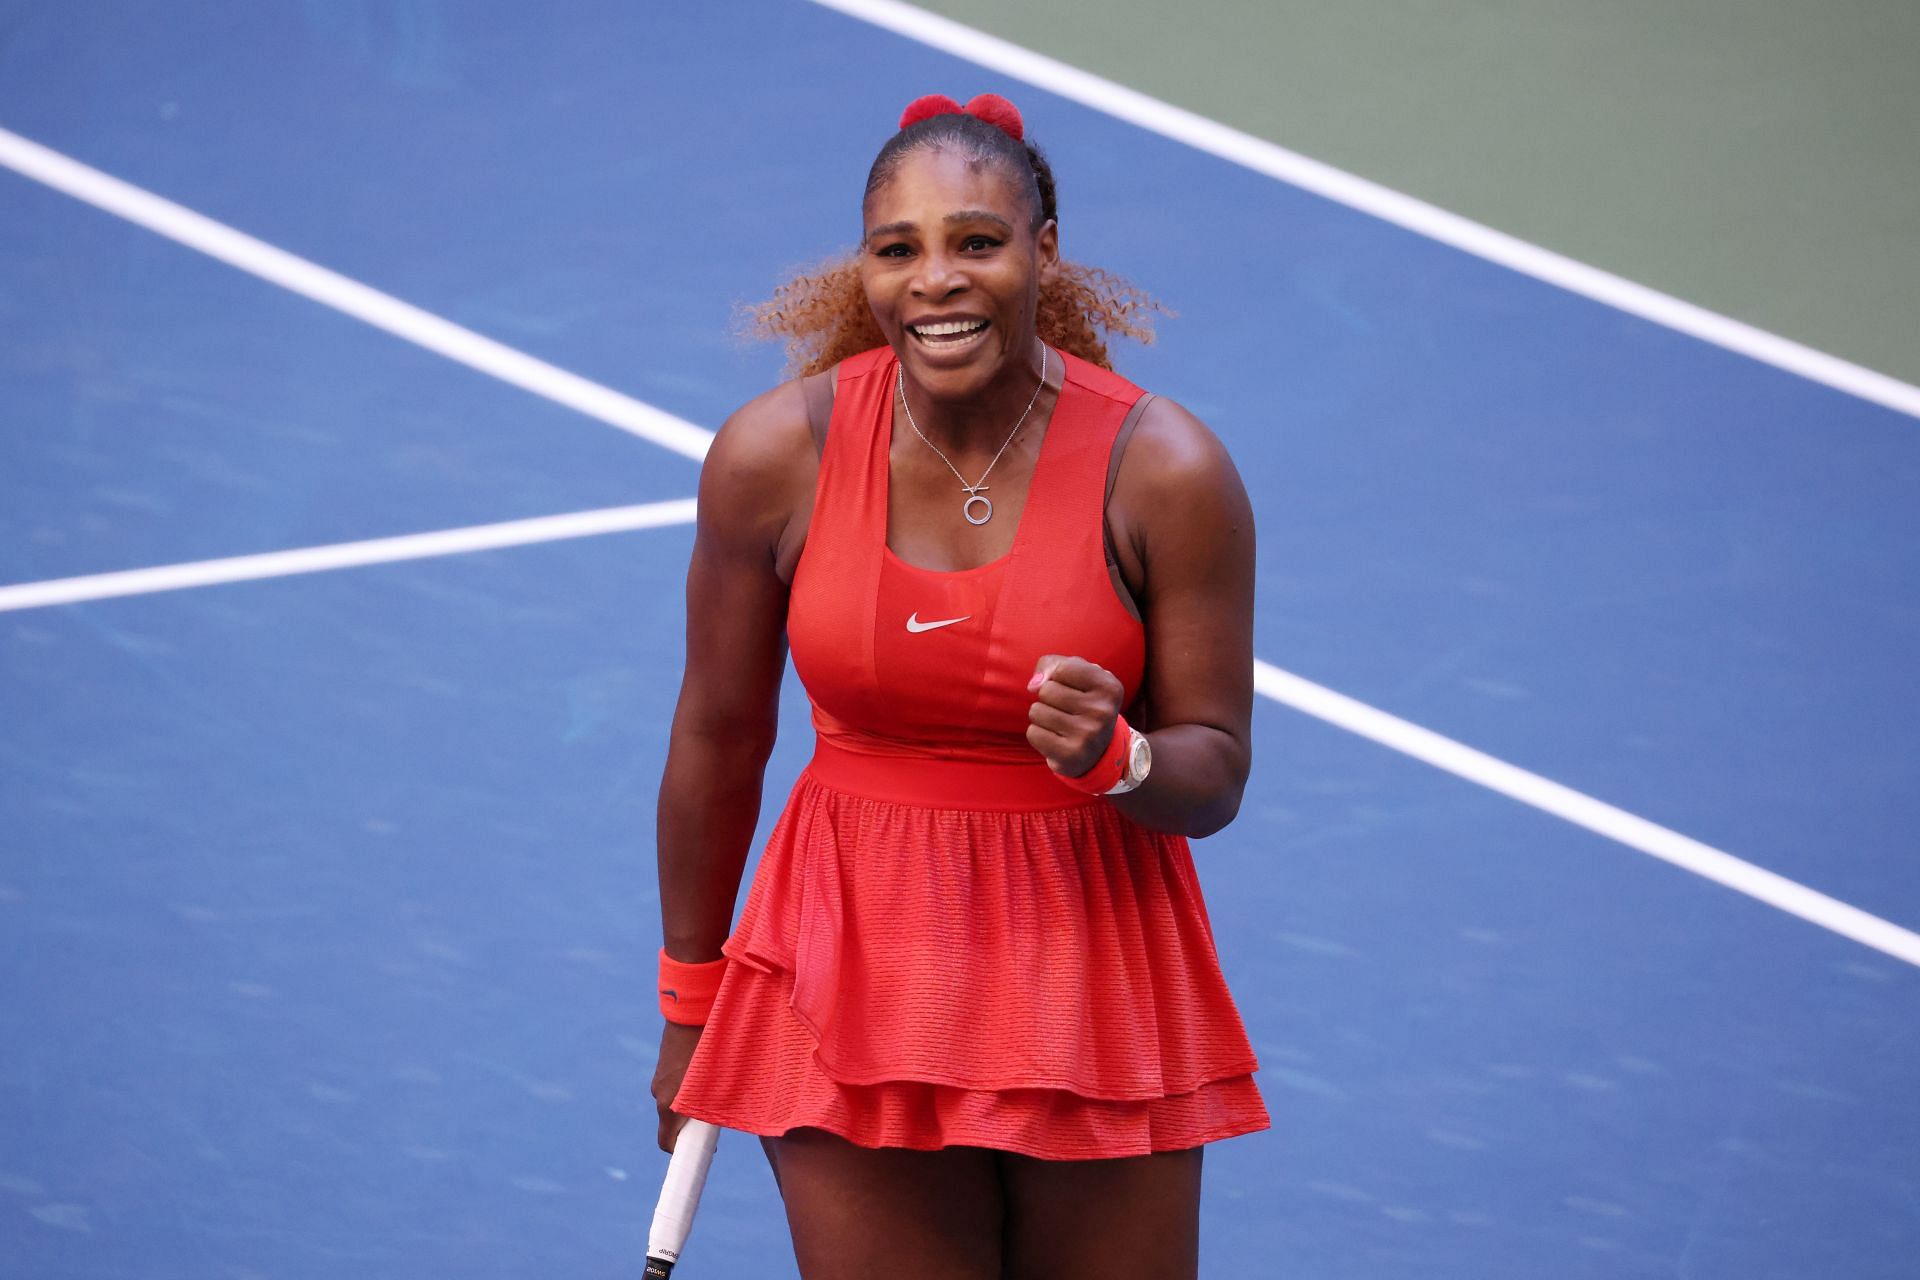 Serena Williams will gear up for the US Open by playing two WTA1000 events in the lead-up to the event